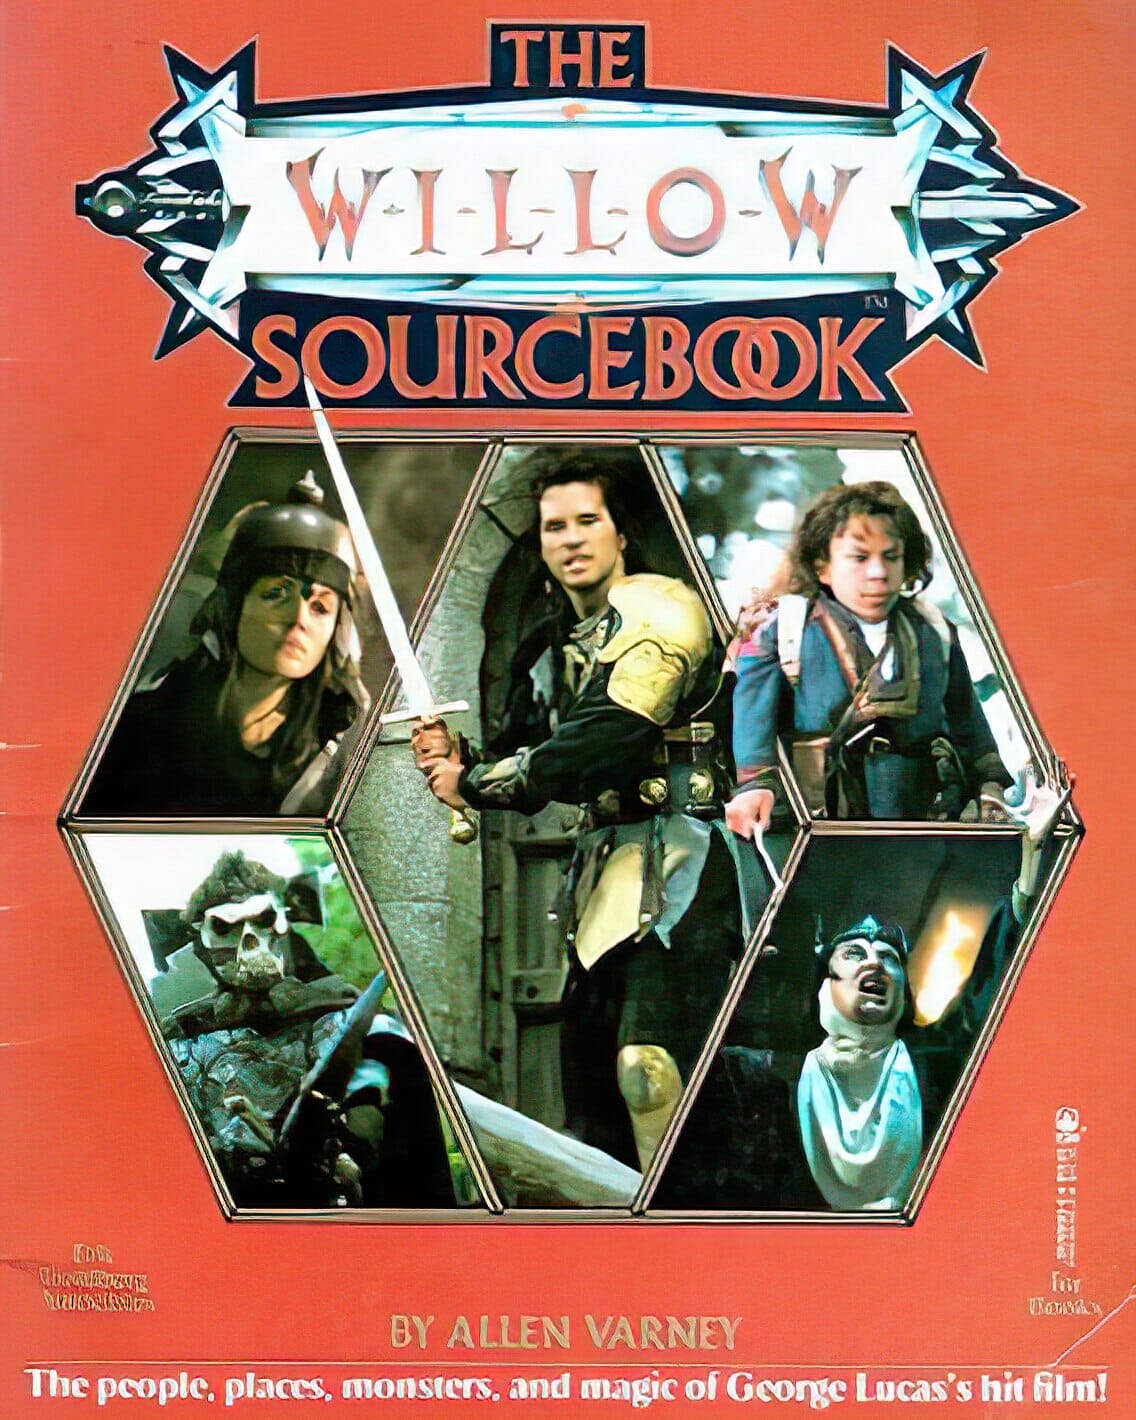 The Willow Sourcebook